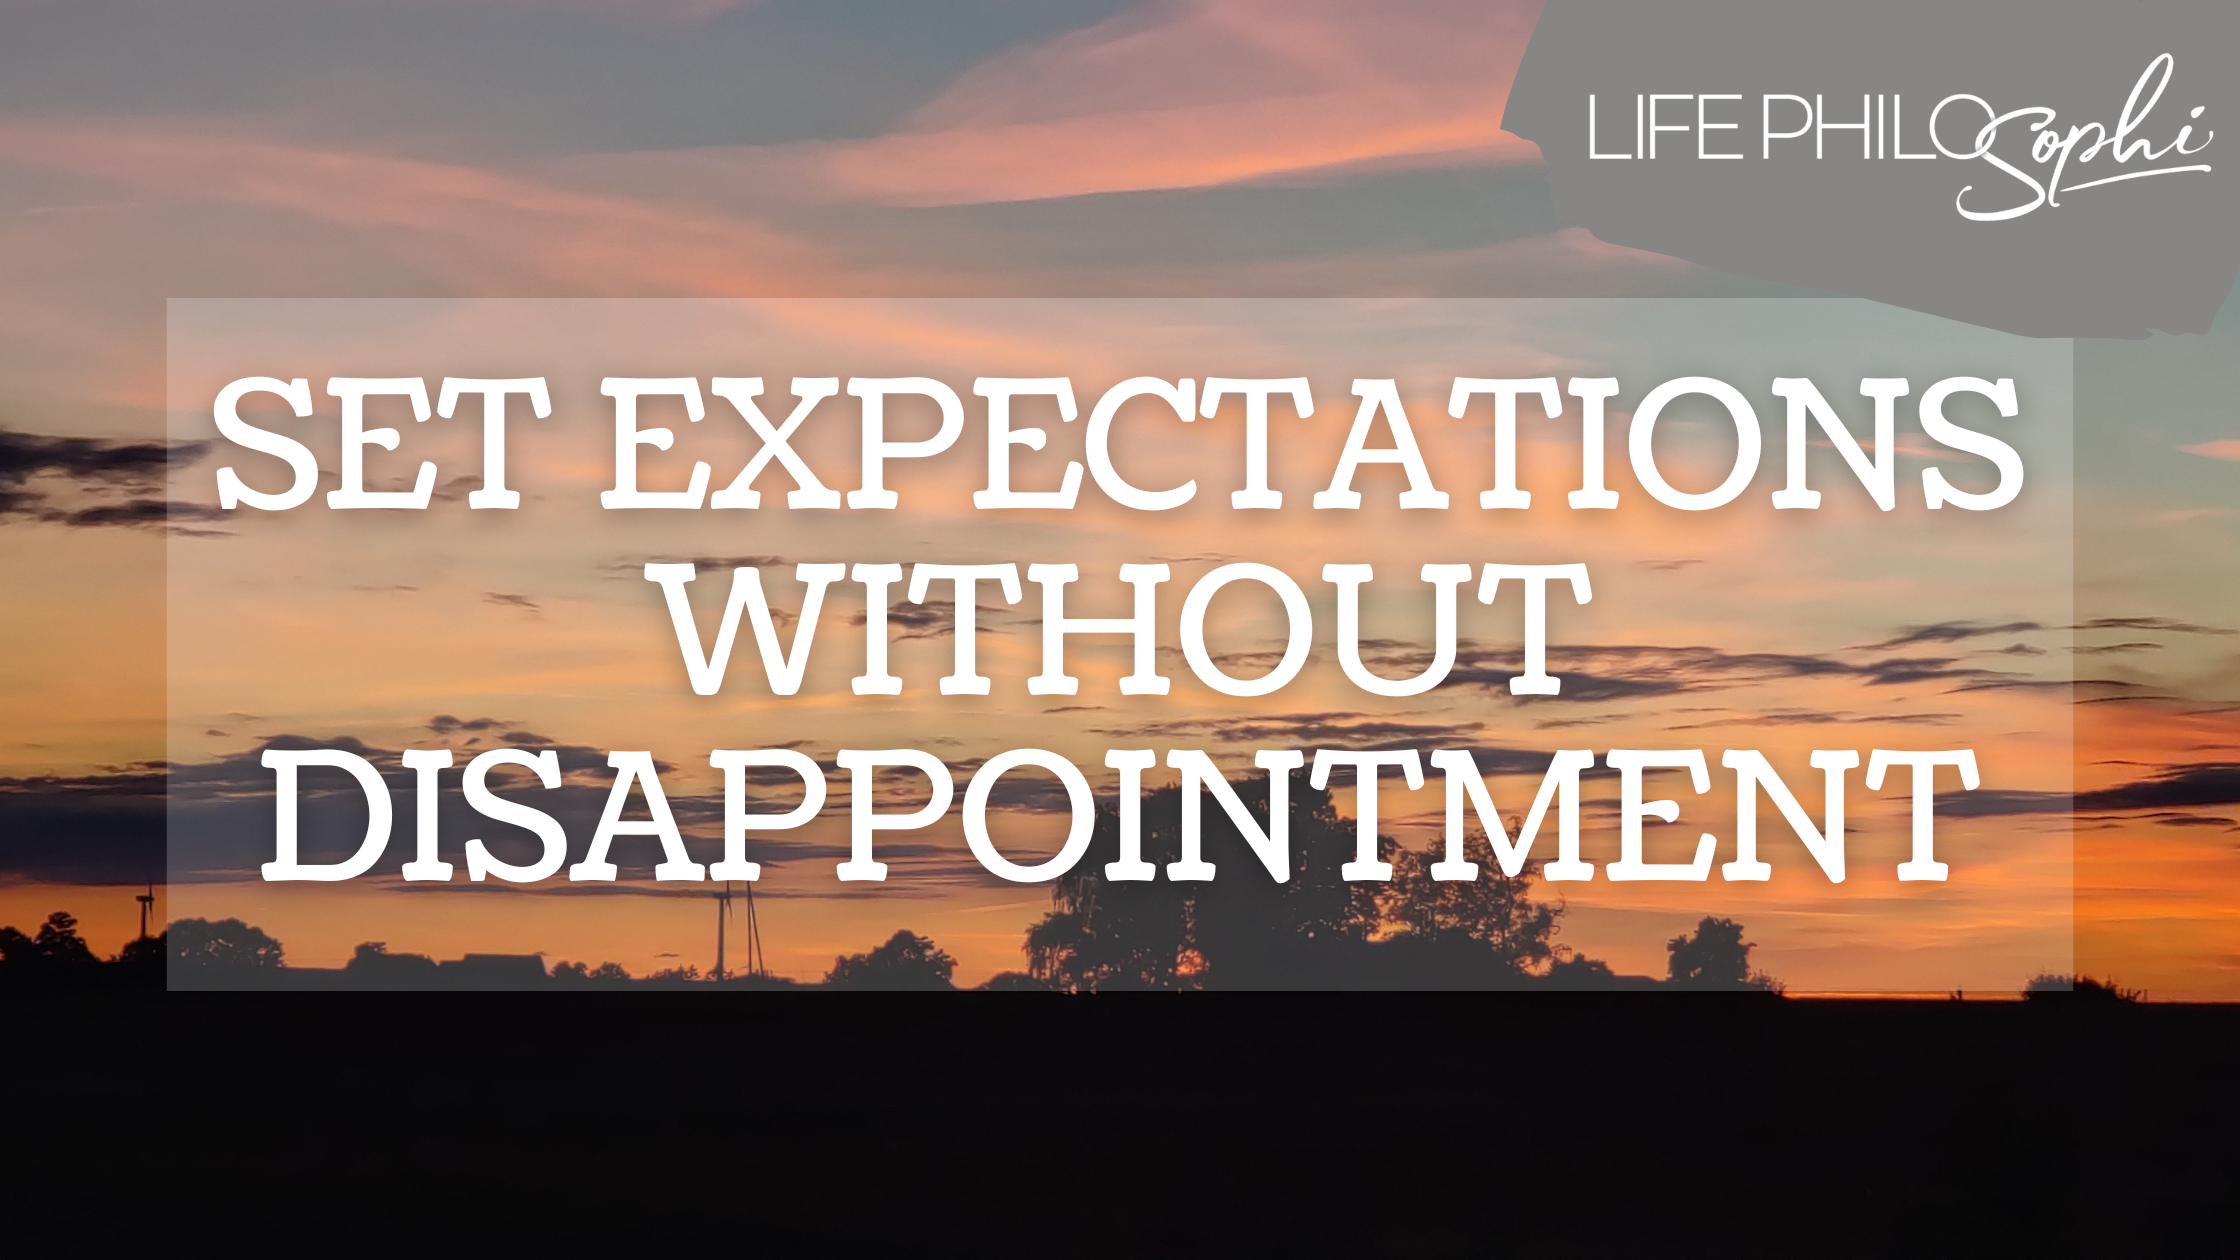 Learn how to set expectations without disappointment